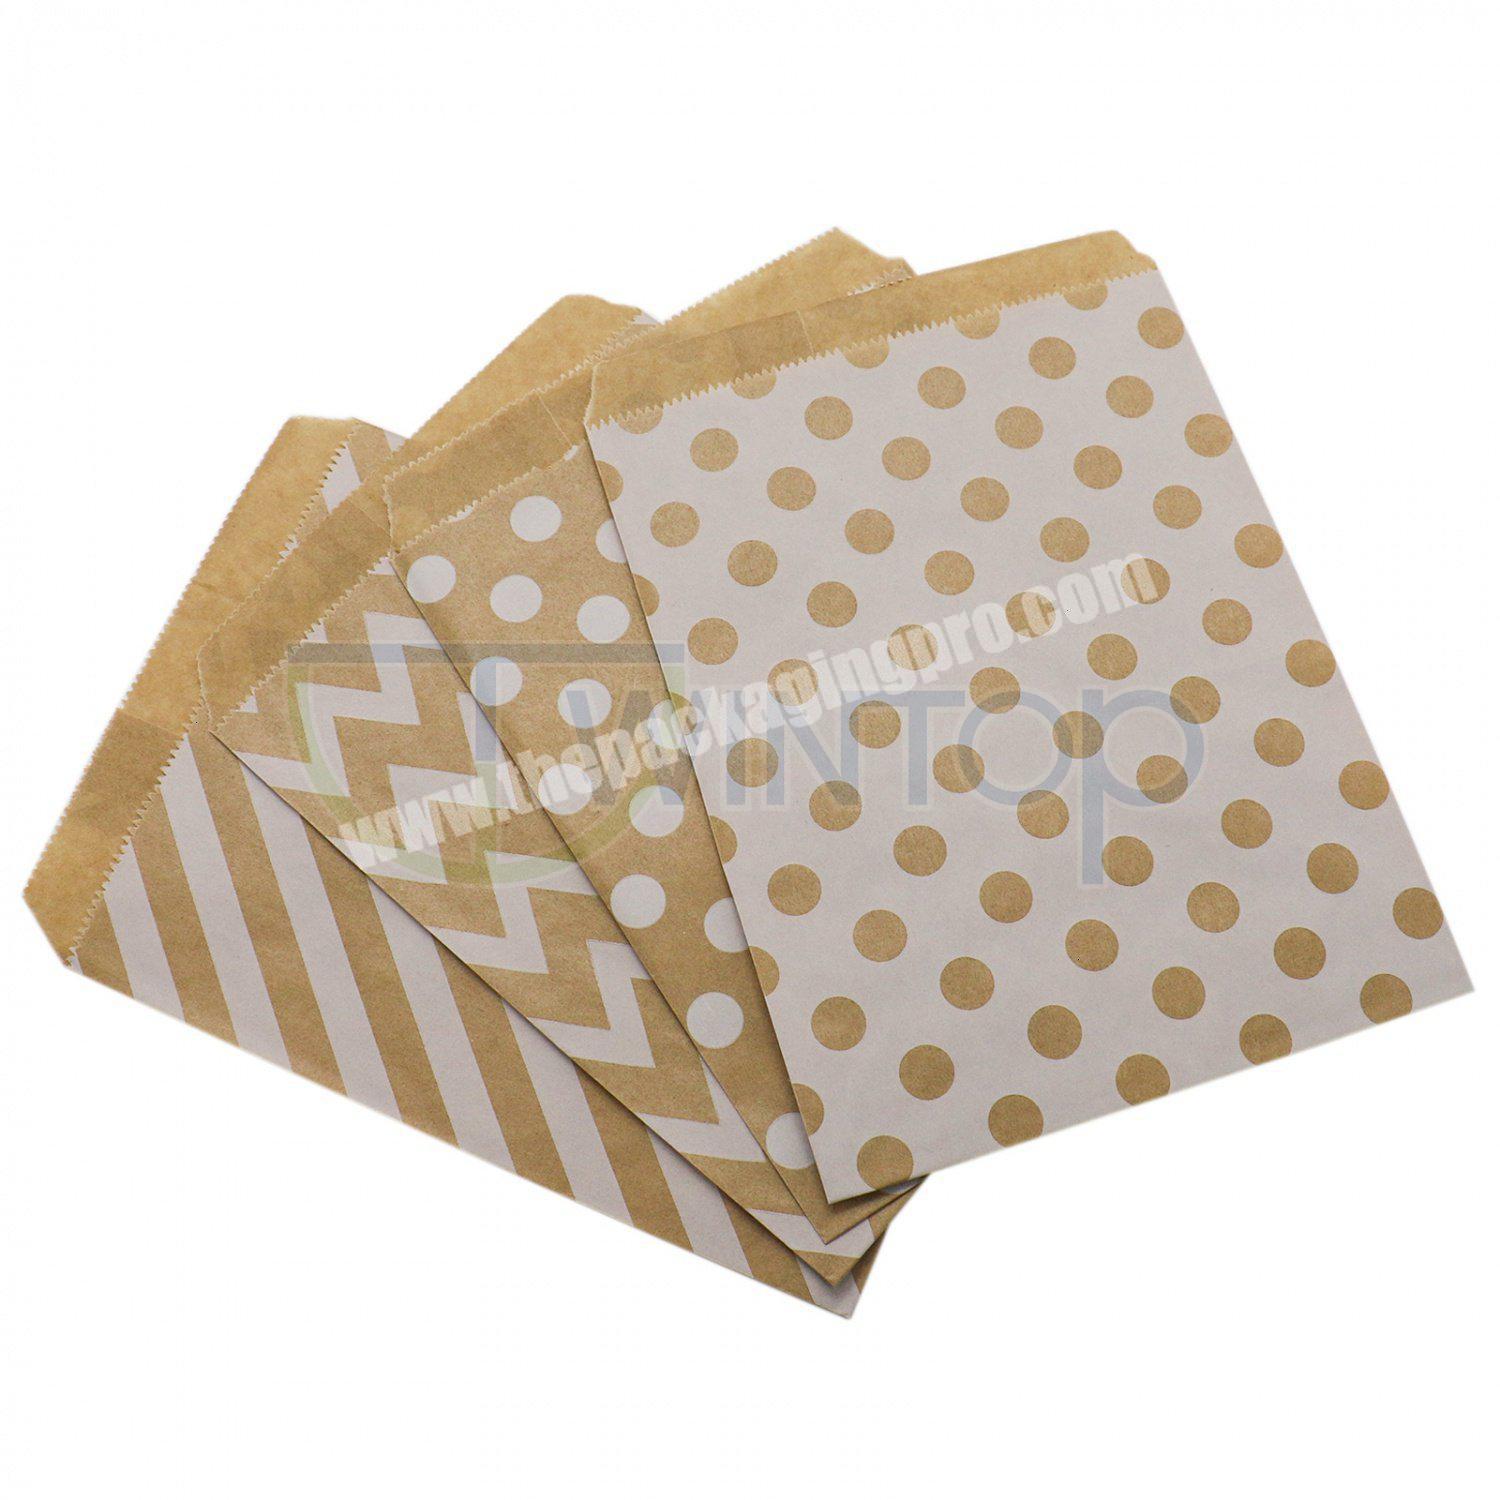 Brown paper bags with print for grocery